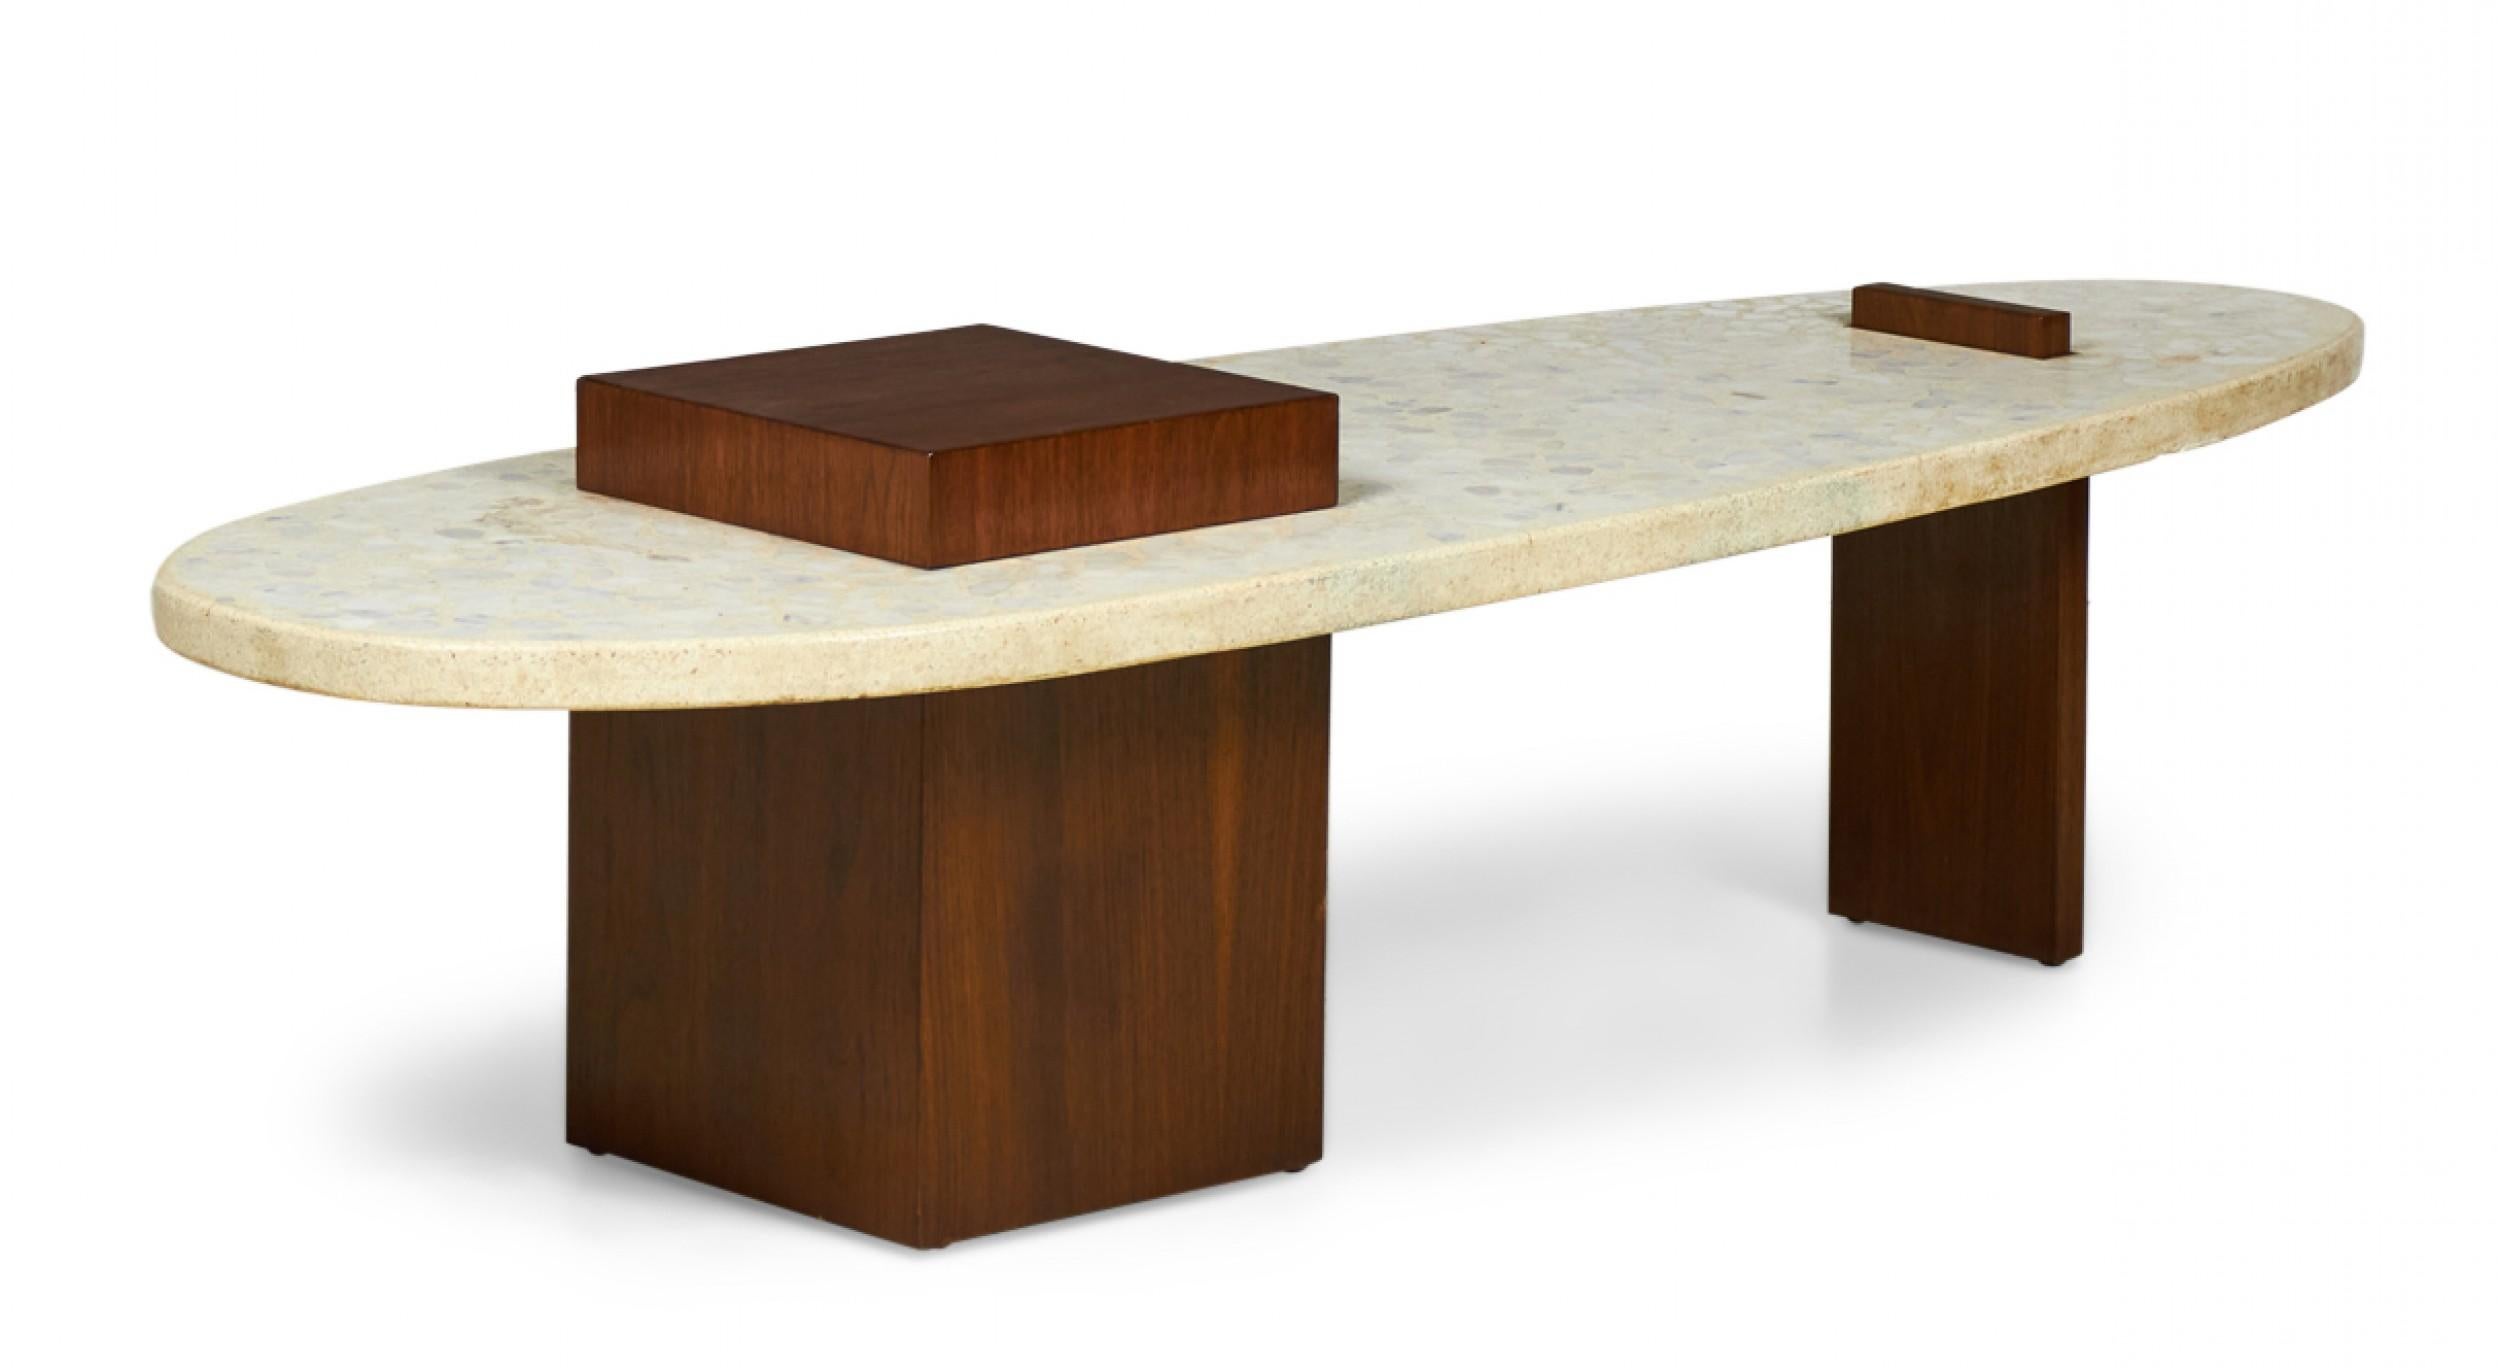 Marble Terrazzo and Walnut Surfboard-Form Coffee Table 'Manner of Harvey Probber' For Sale